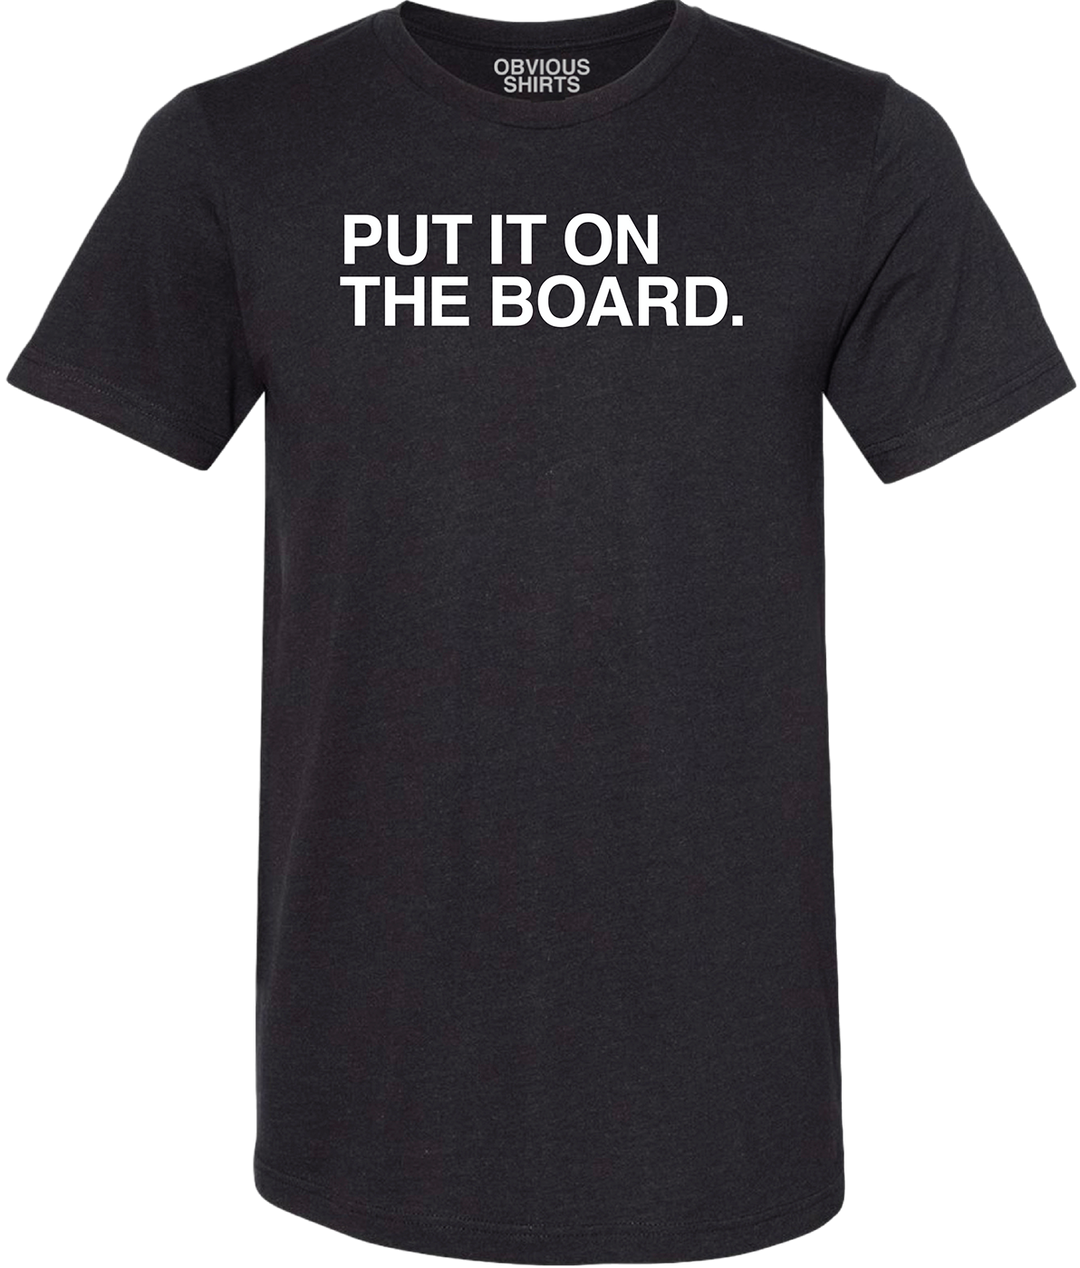 PUT IT ON THE BOARD. - OBVIOUS SHIRTS.